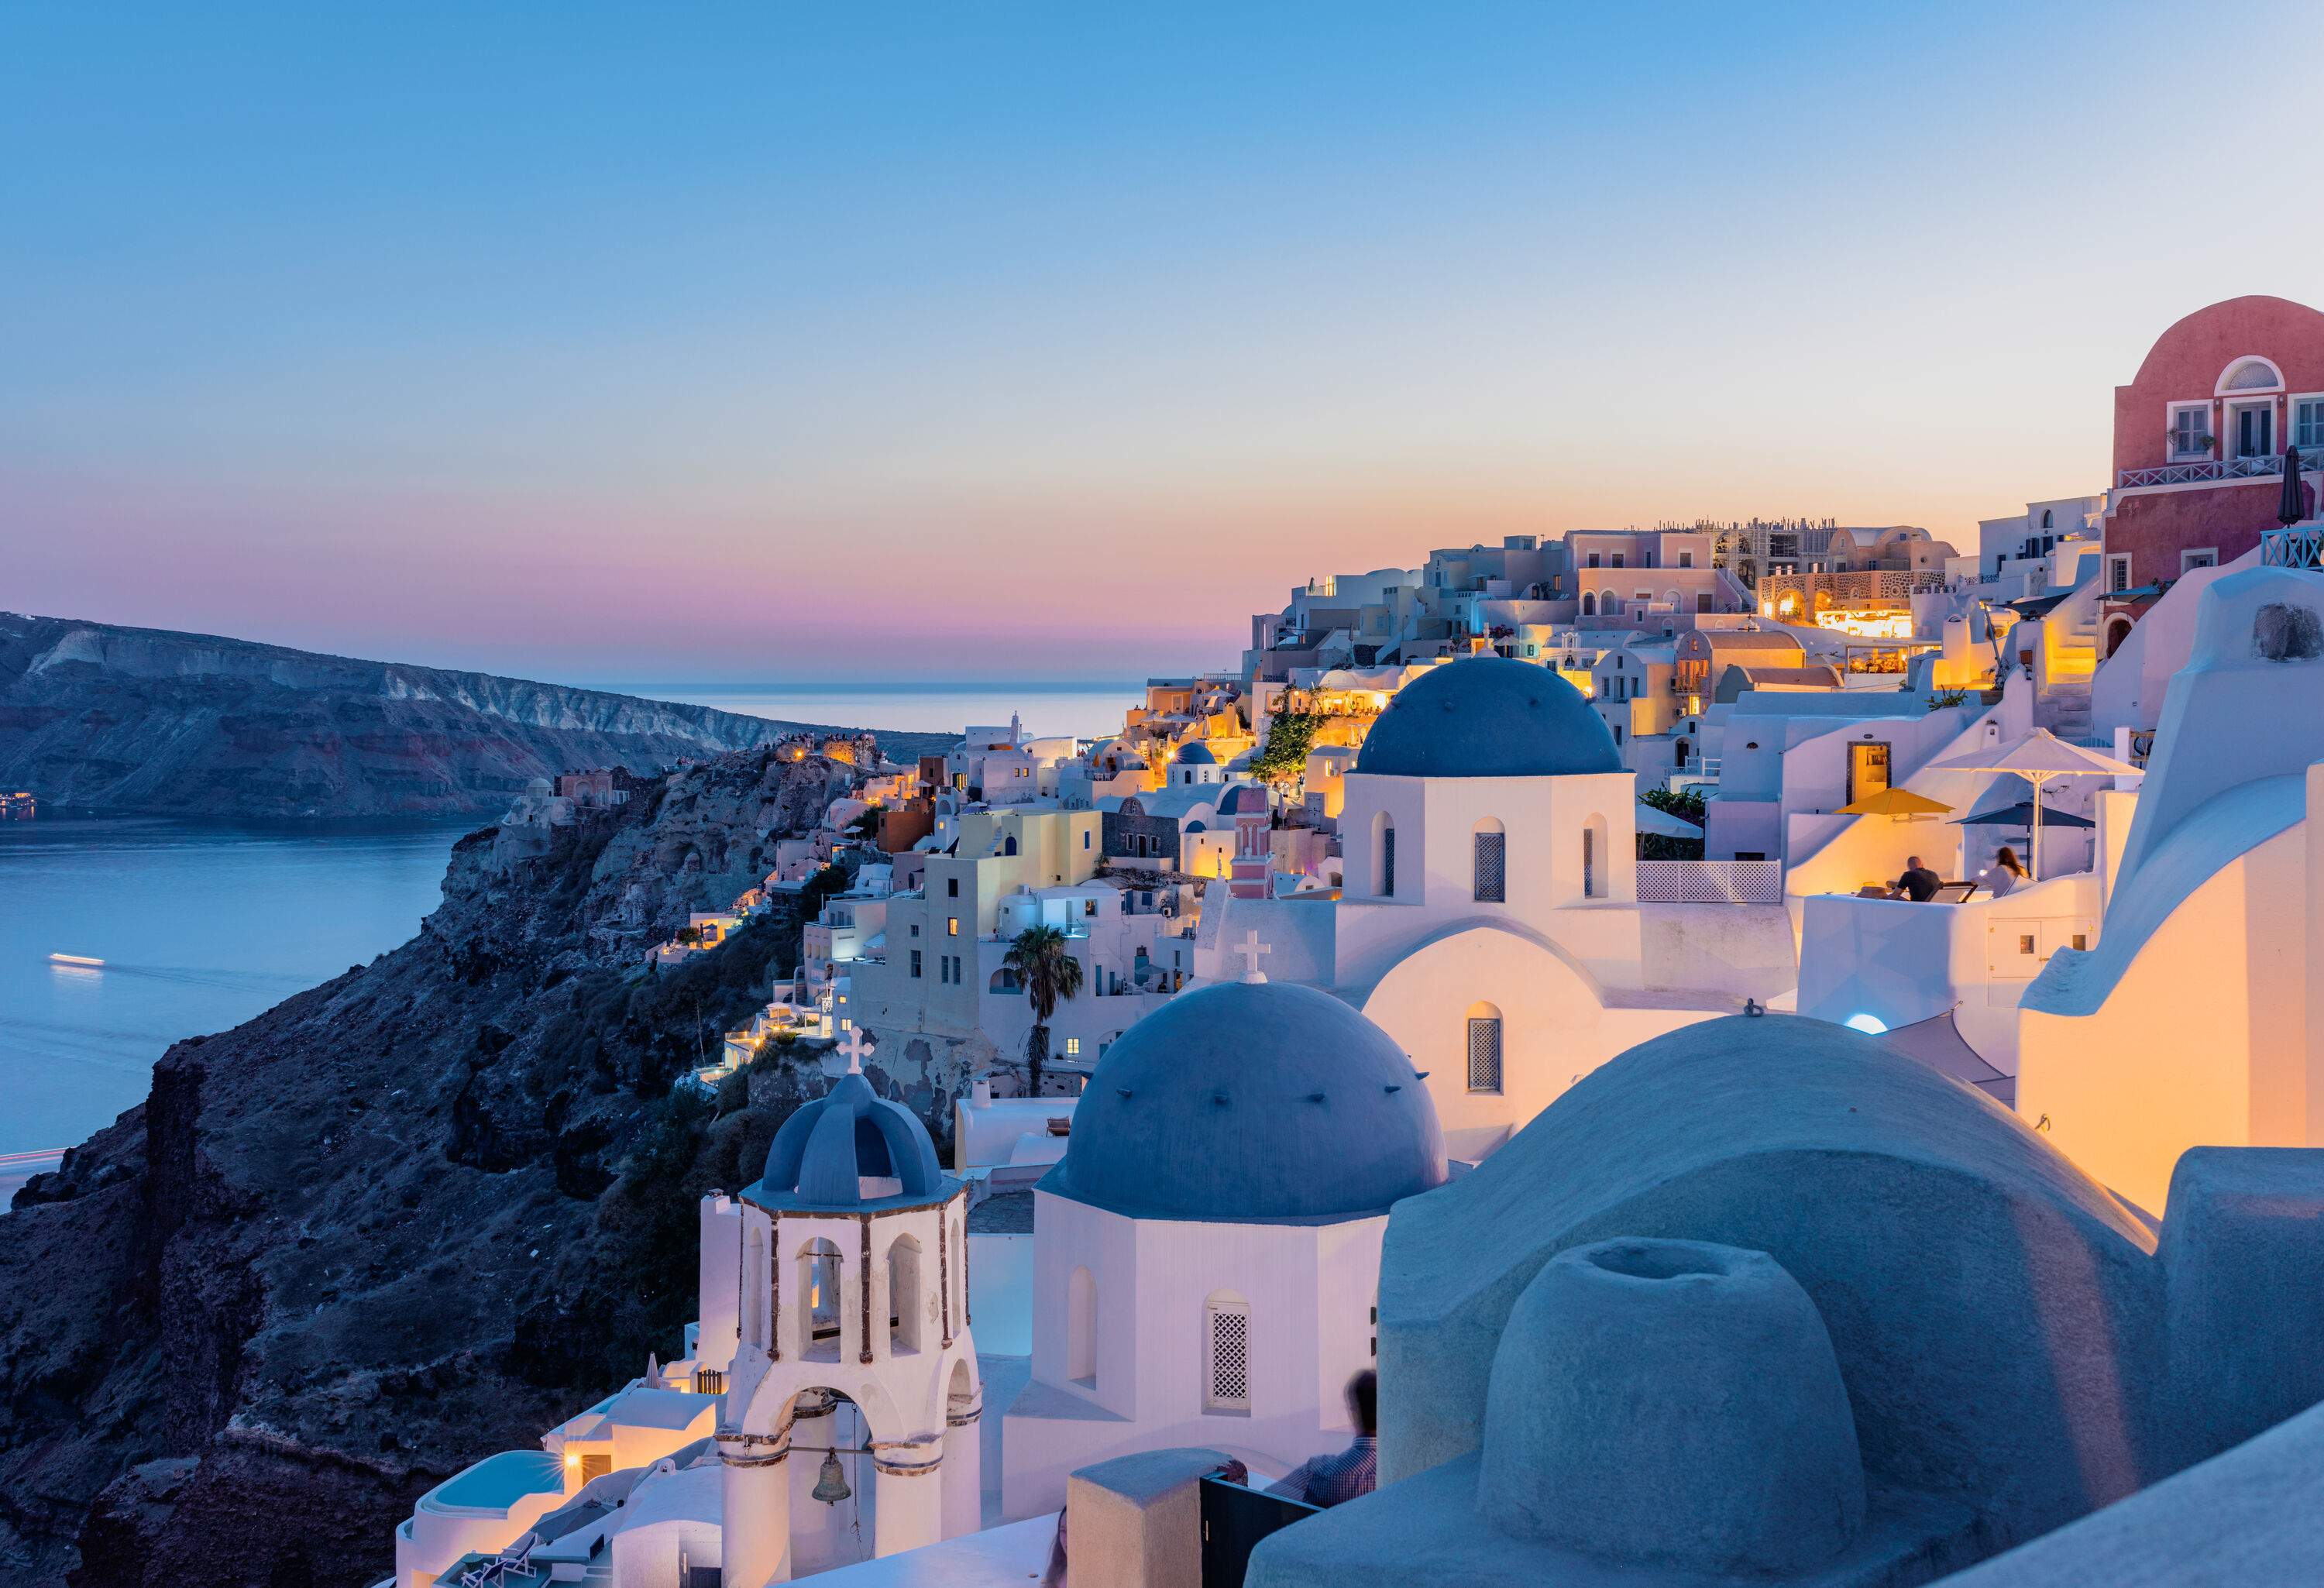 The soft blue hues of the sun setting over the sea cast a warm glow over the white buildings and blue-domed churches of the island's iconic architecture.